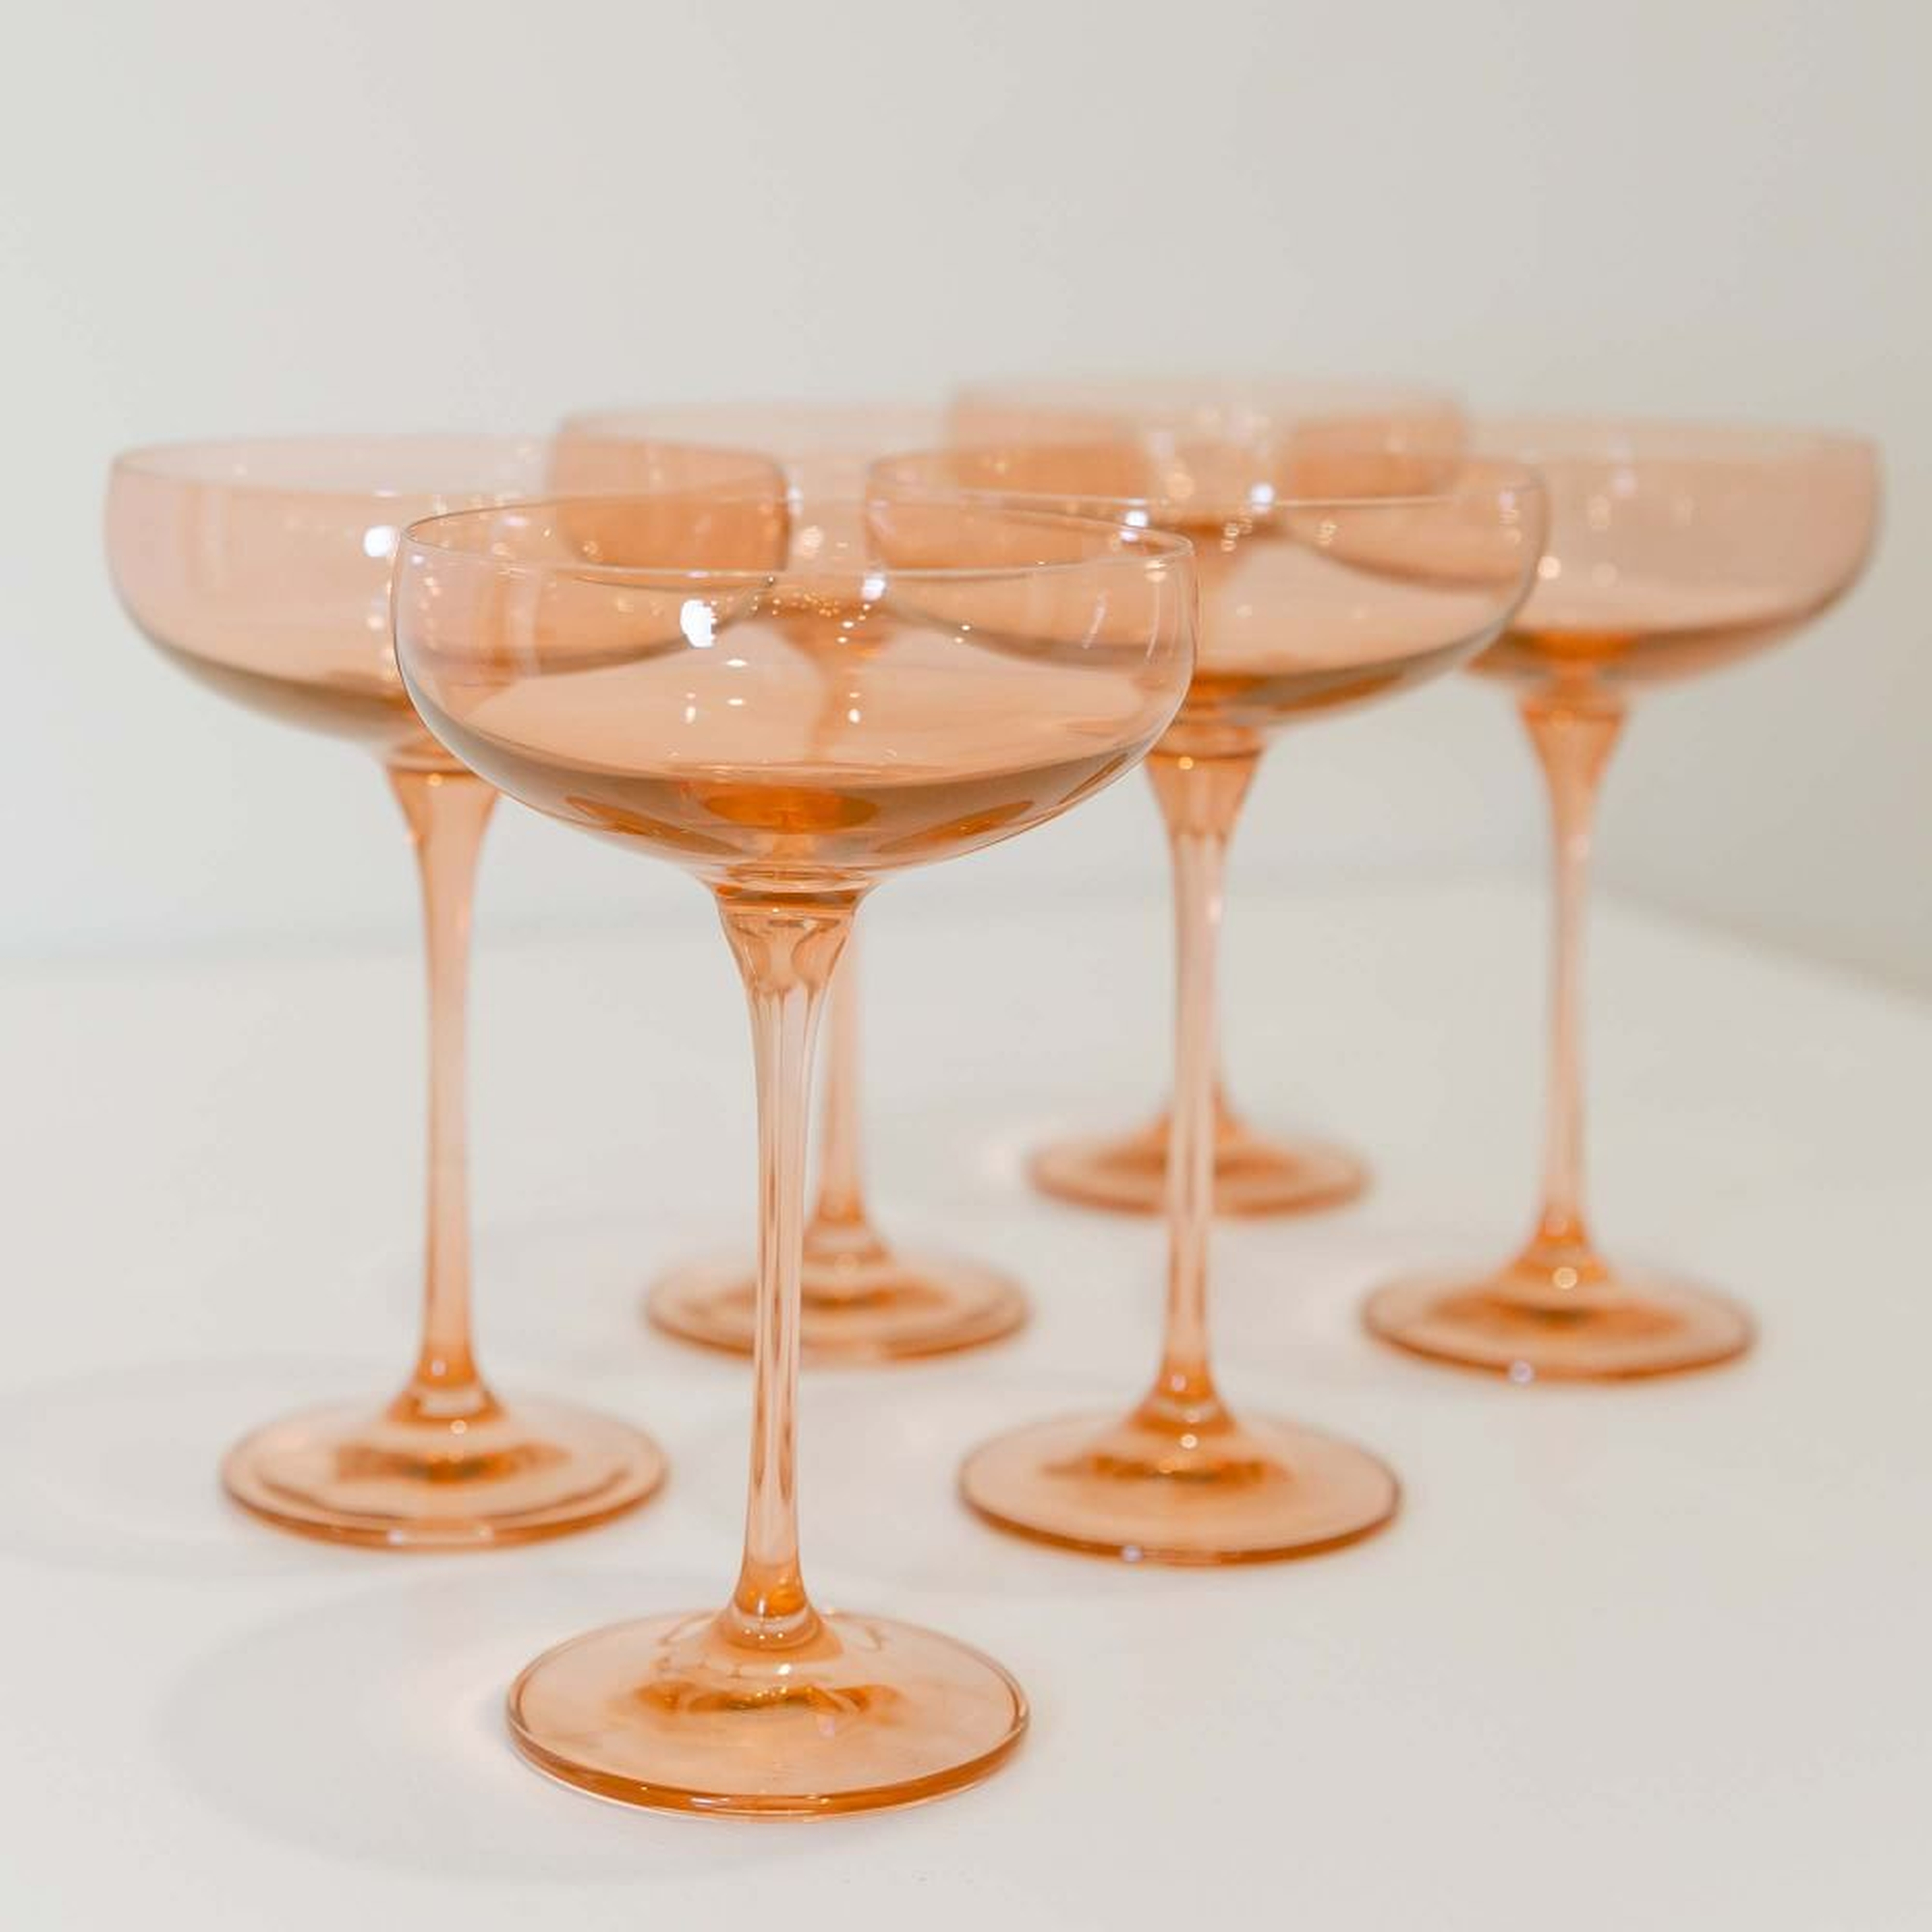 Estelle Colored Champagne Coupe Glass, Blush Pink, Set of 6 - West Elm